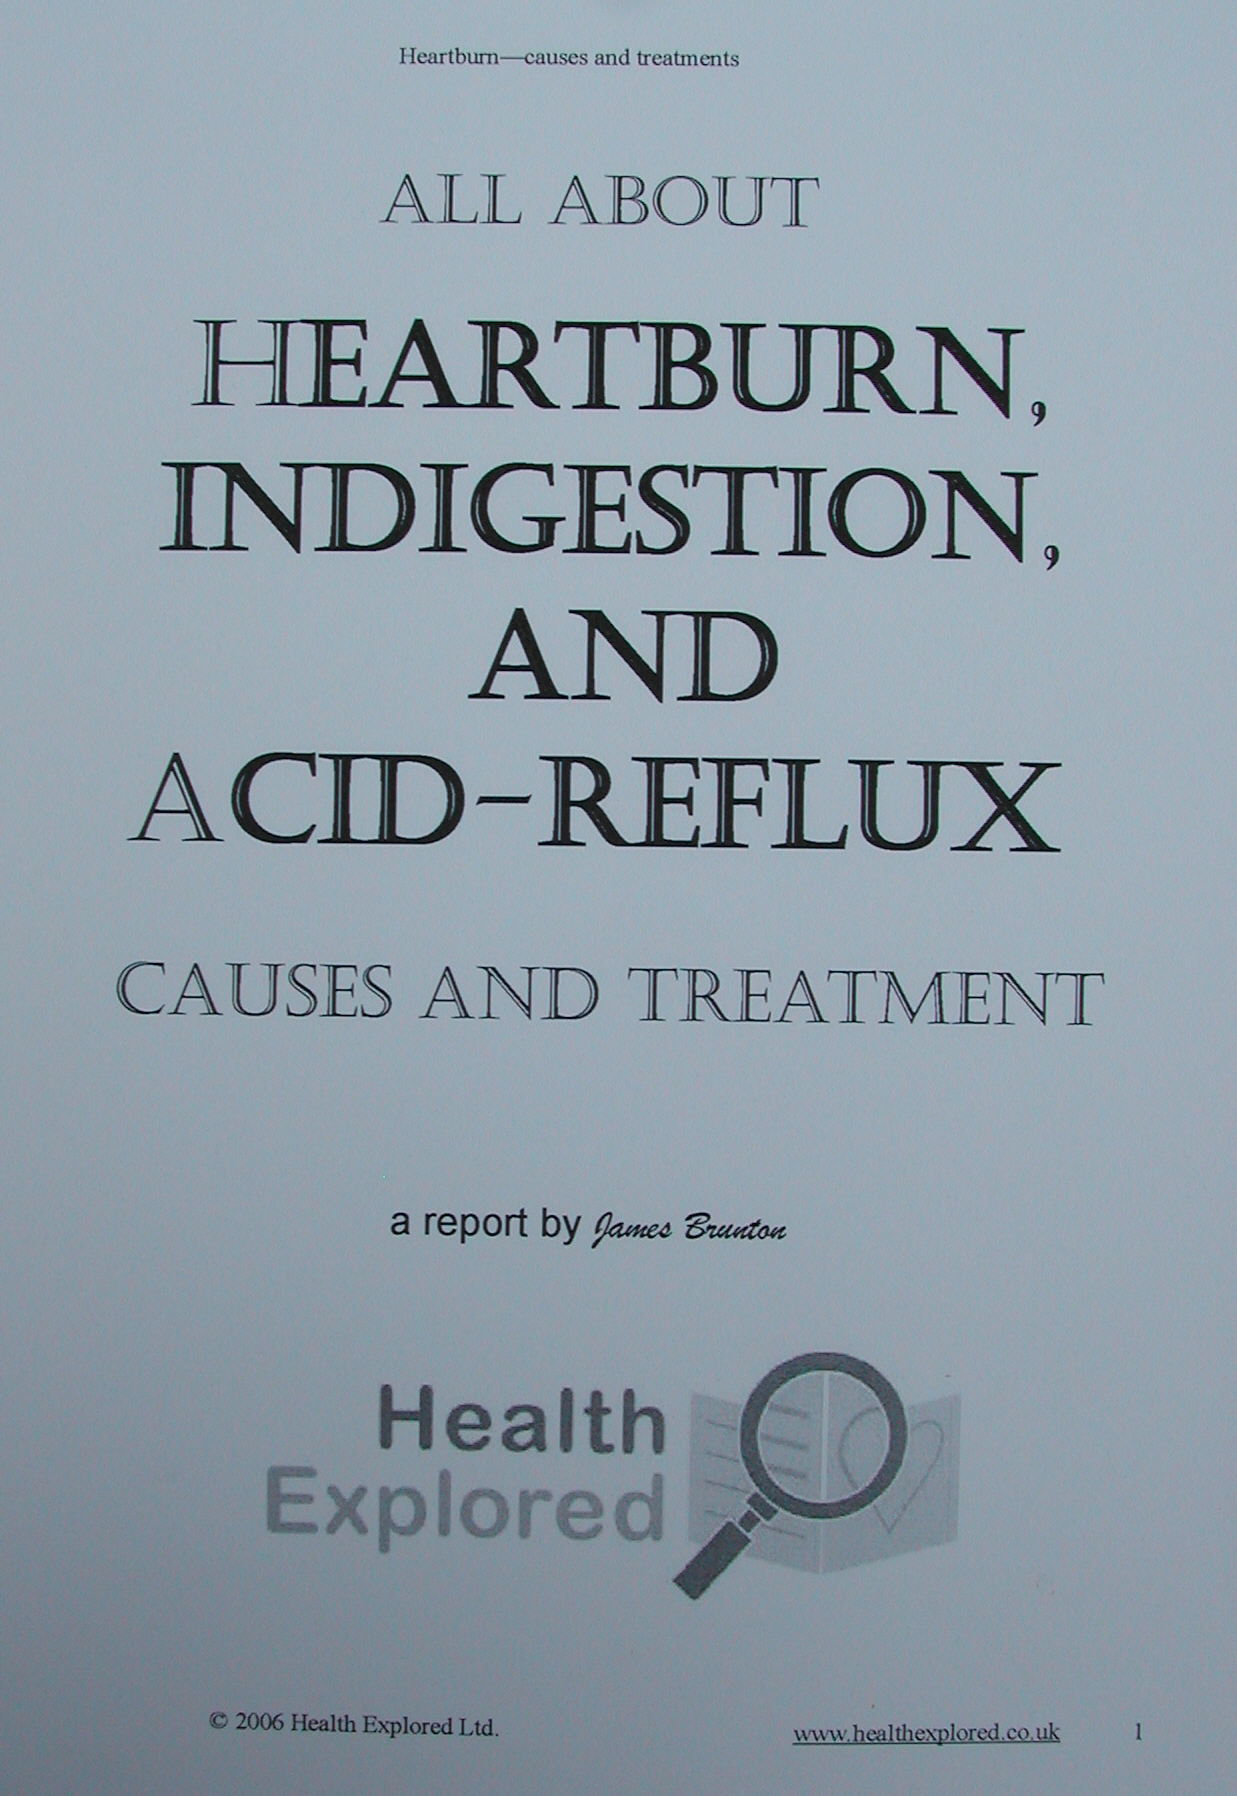 Treat acid reflux without drugs